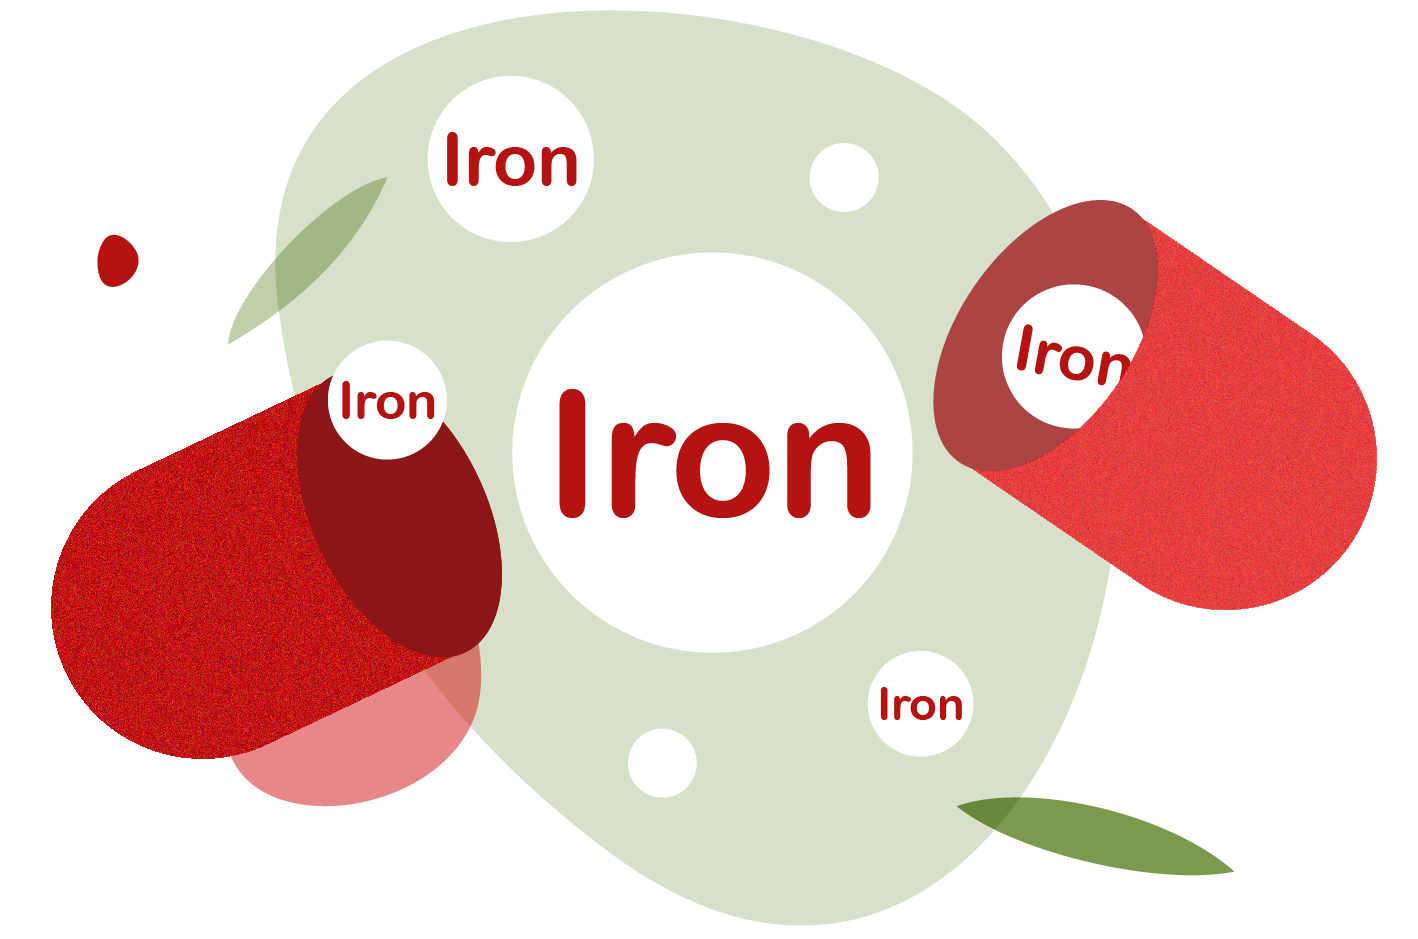 Iron and iron tablets